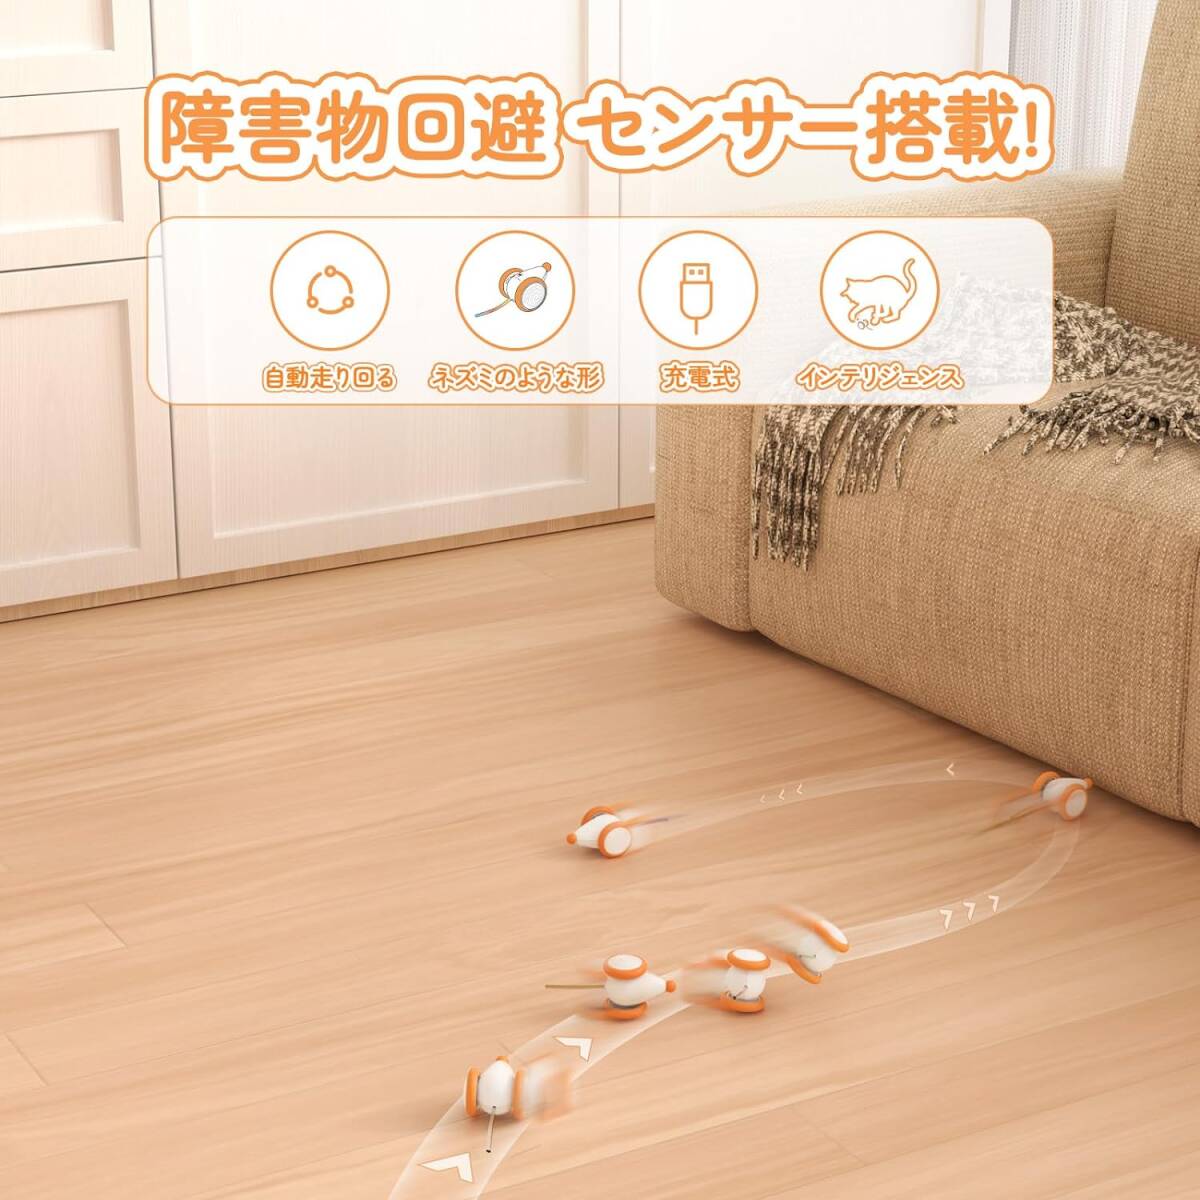 [ cat Chan. mischief ...2024 year version ] cat toy mouse automatic wi Kid * mouse * plus Cheerble electric ( orange )